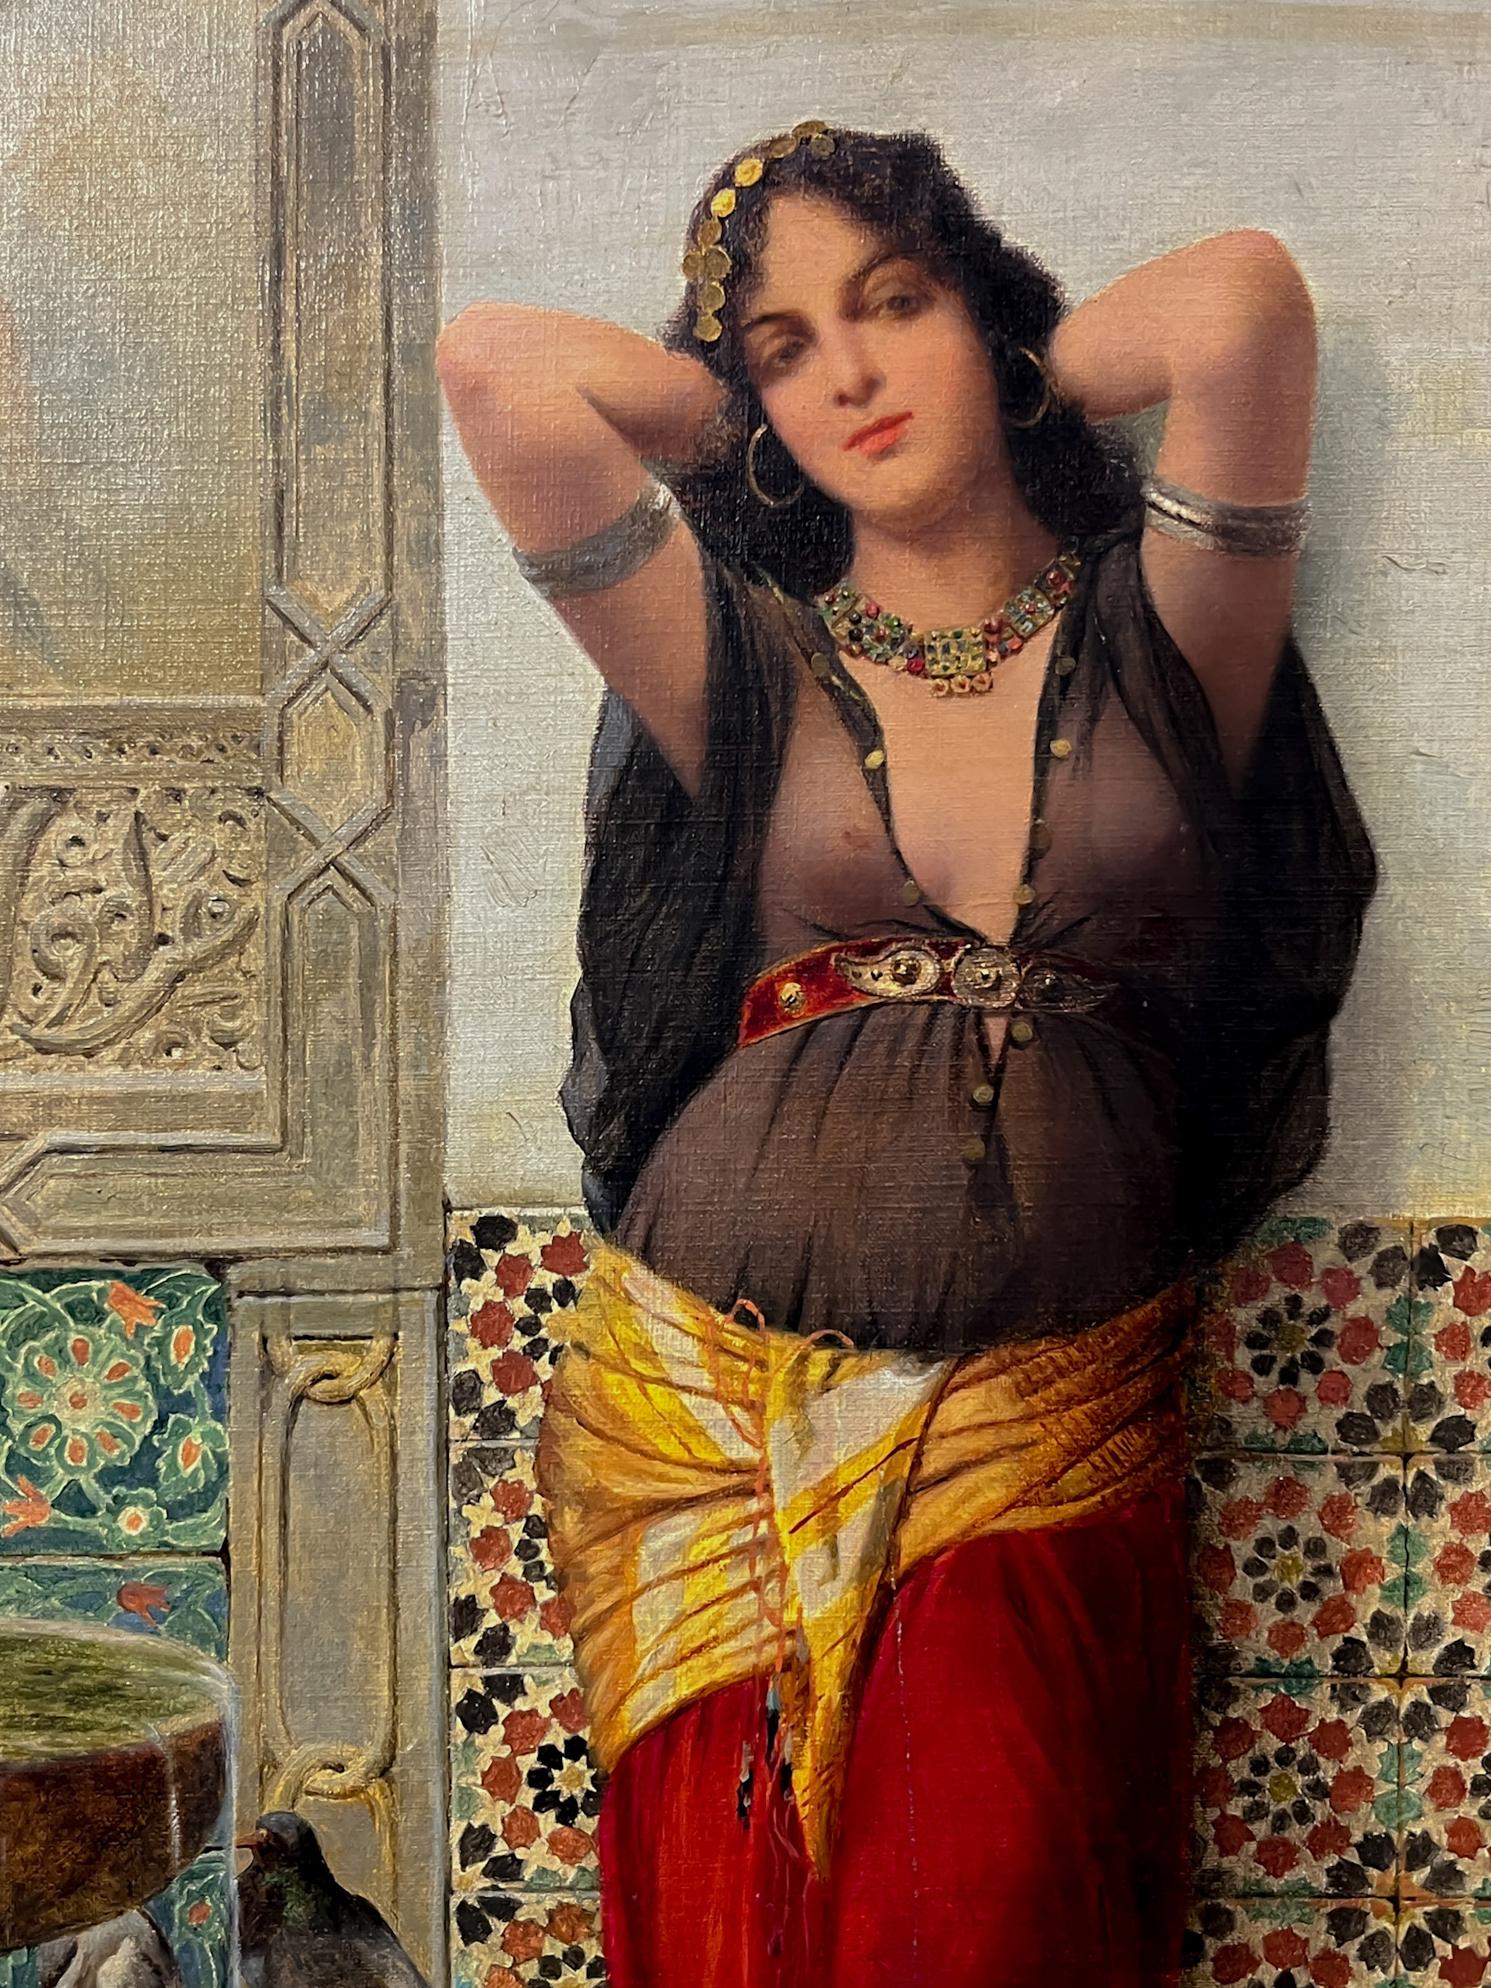 A fine oil painting depicting a figure of a woman in a harem wearing a billowing black sheer top, an ornately beaded necklace and a fabulous red belt with large gold hardware, as she relaxes in an interior home courtyard with pigeons and fountain.